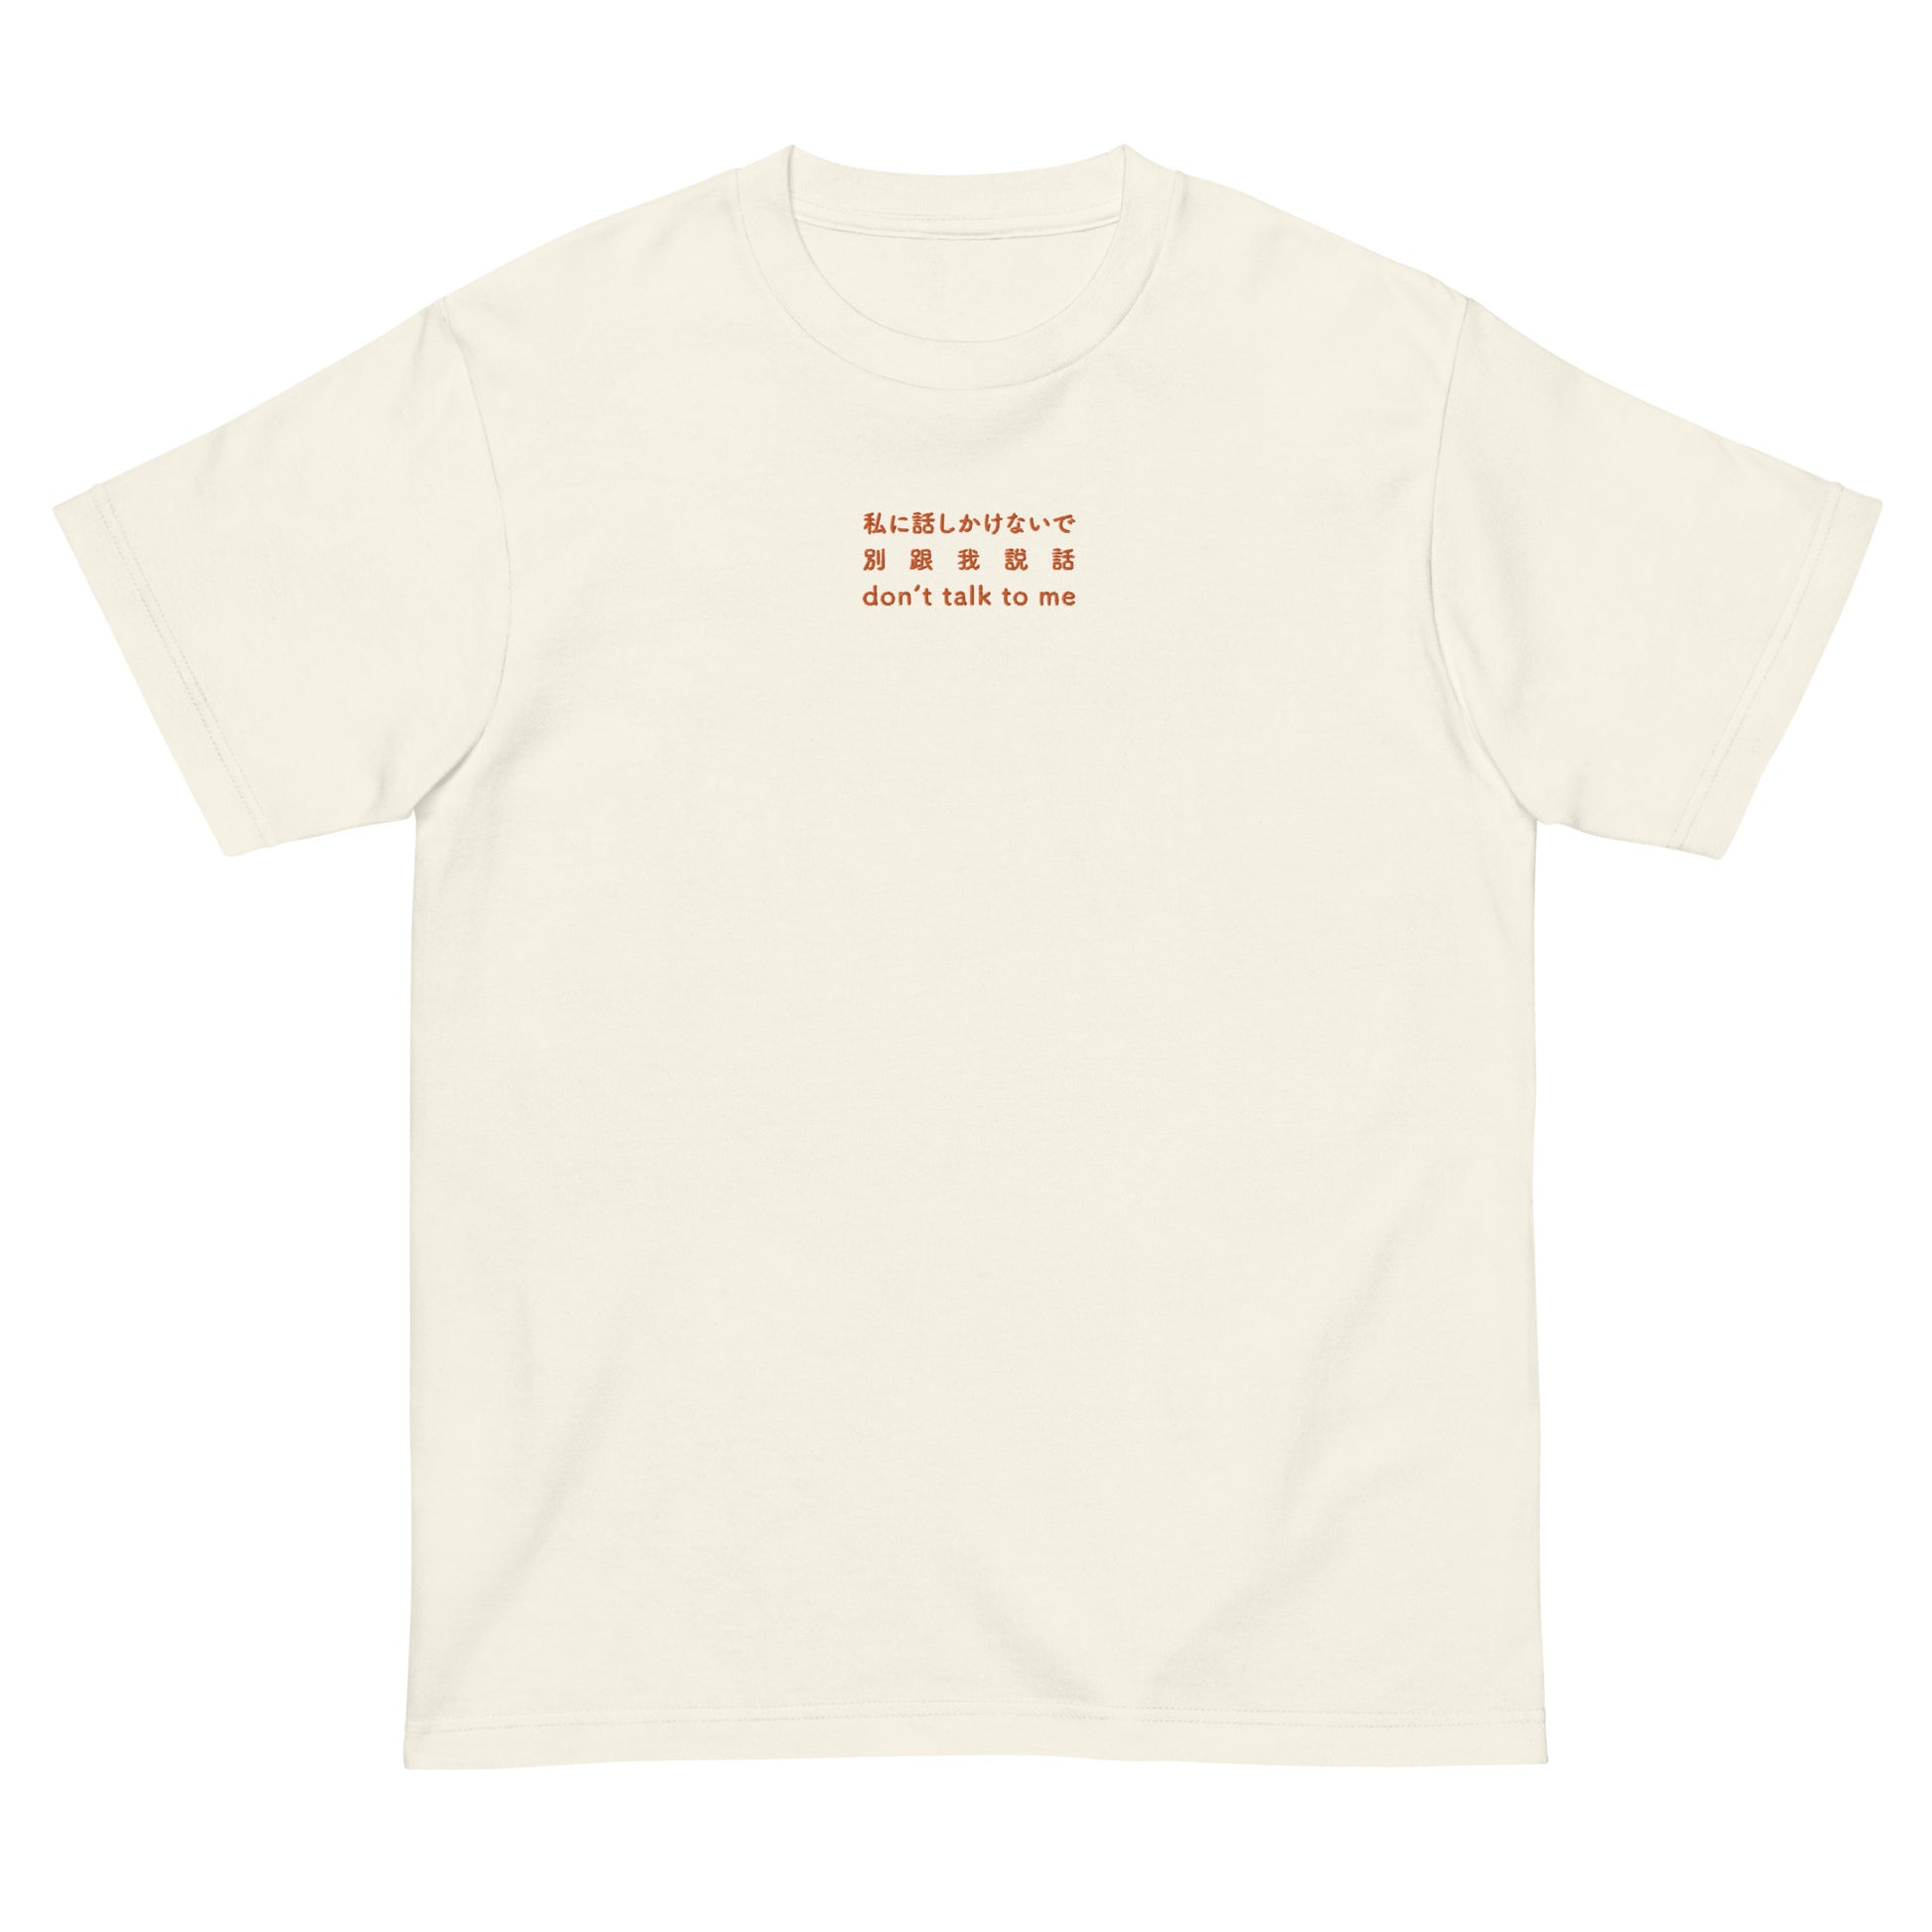 Ivory High Quality Tee - Front Design with an Orange Embroidery "don't talk to me" in Japanese,Chinese and English